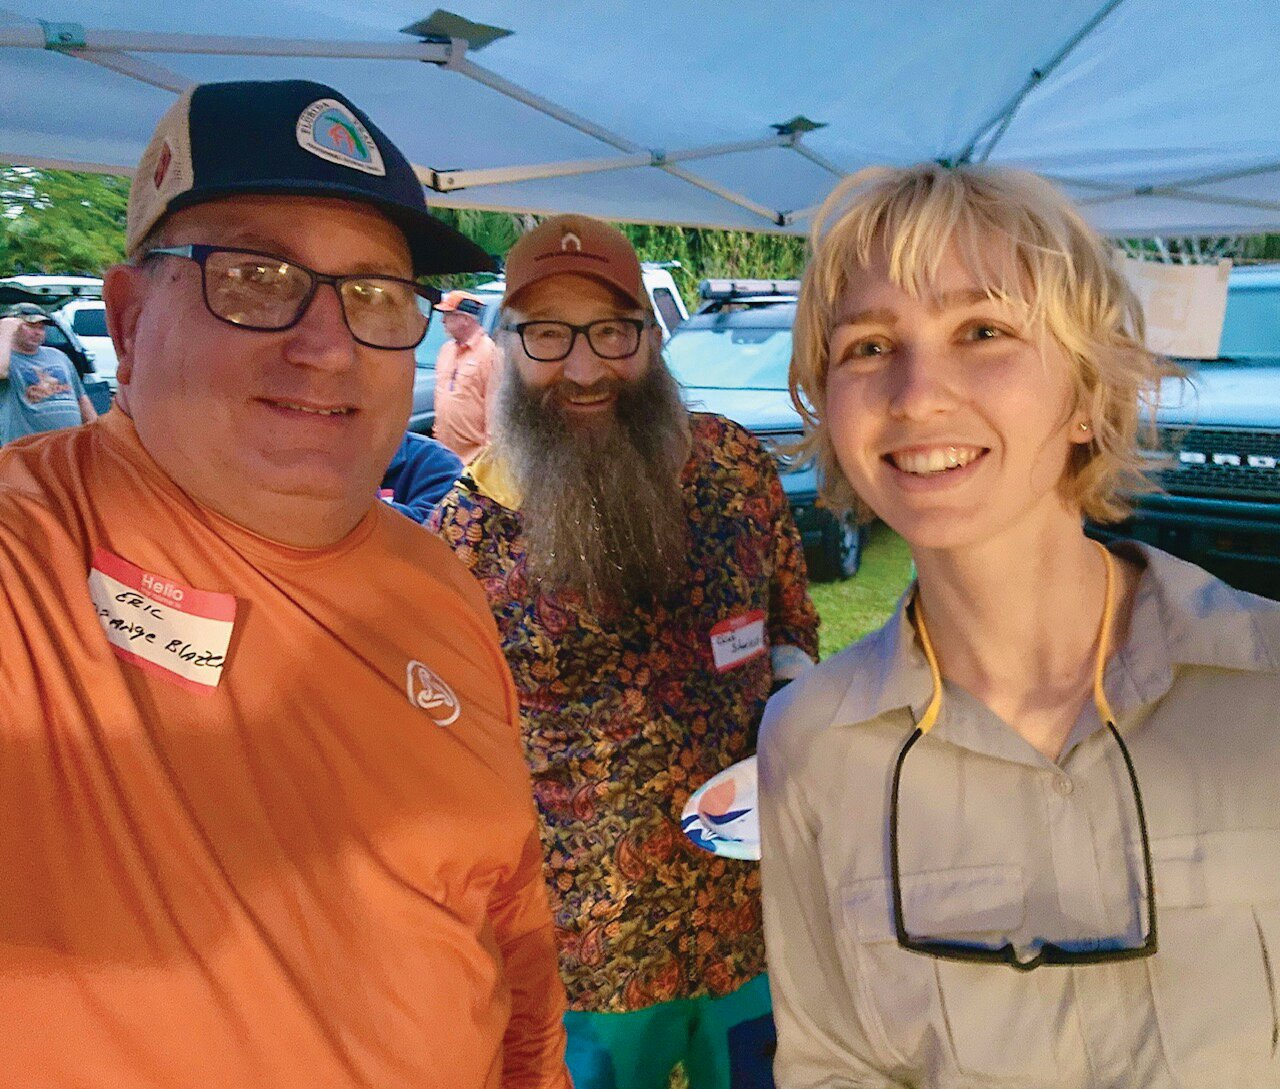 (Left to right) FTA Board Member and hiker Eric Emery; Hiker Chief Shoeless of Amelia Island, FL; Hailey Dansby, FTA Gateway Community Coordinator